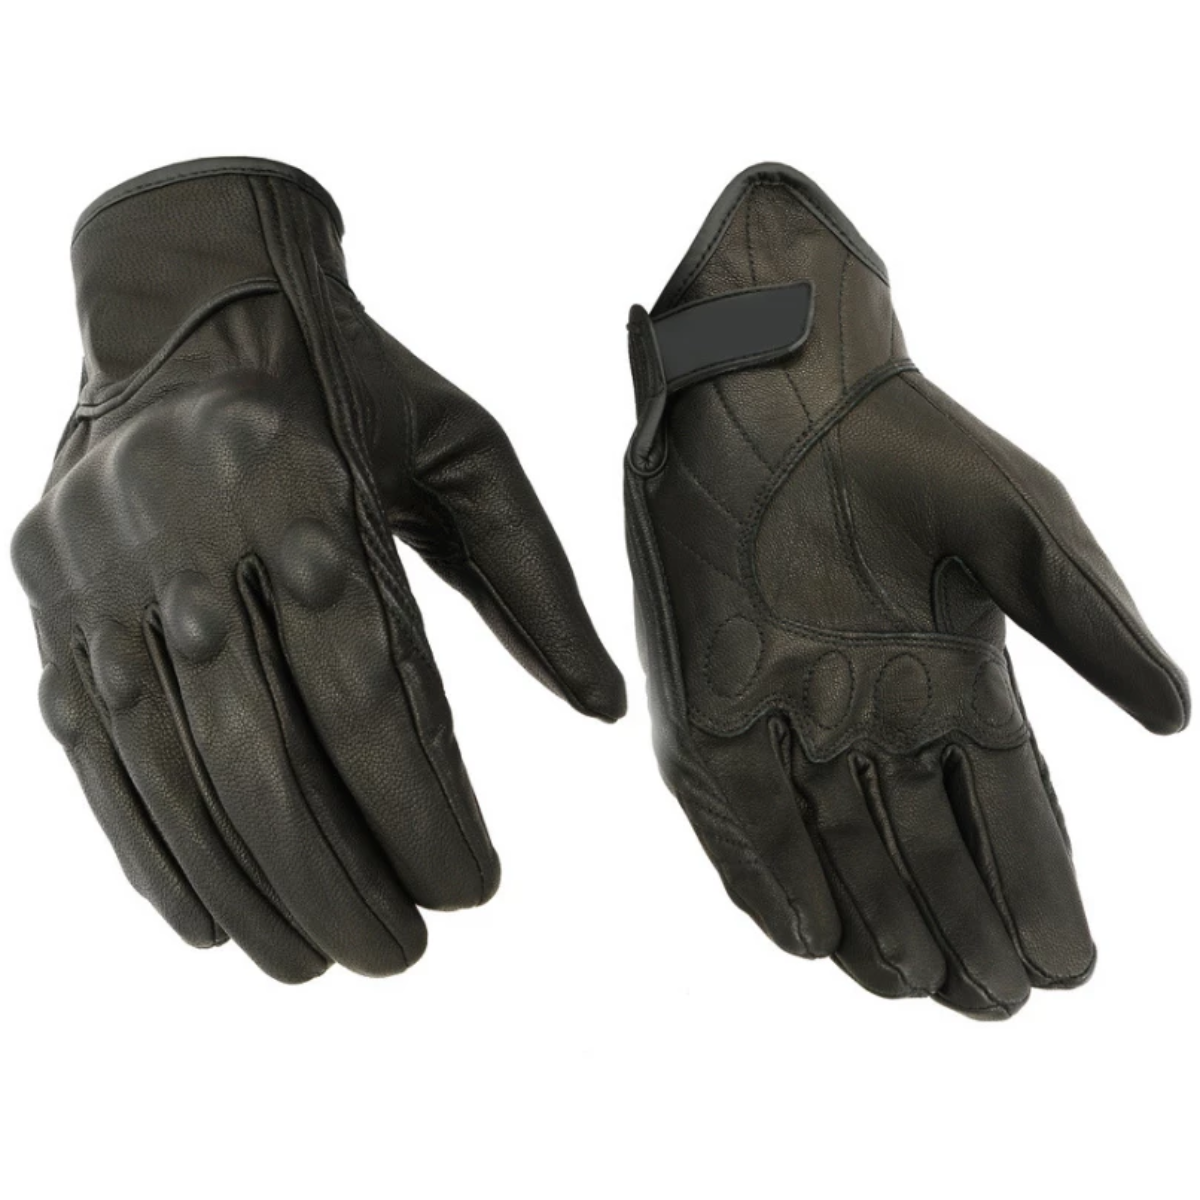 Daniel Smart Sporty Premium Motorcycle Leather Gloves w/ Rubberized Knuckle Protection, Black - American Legend Rider